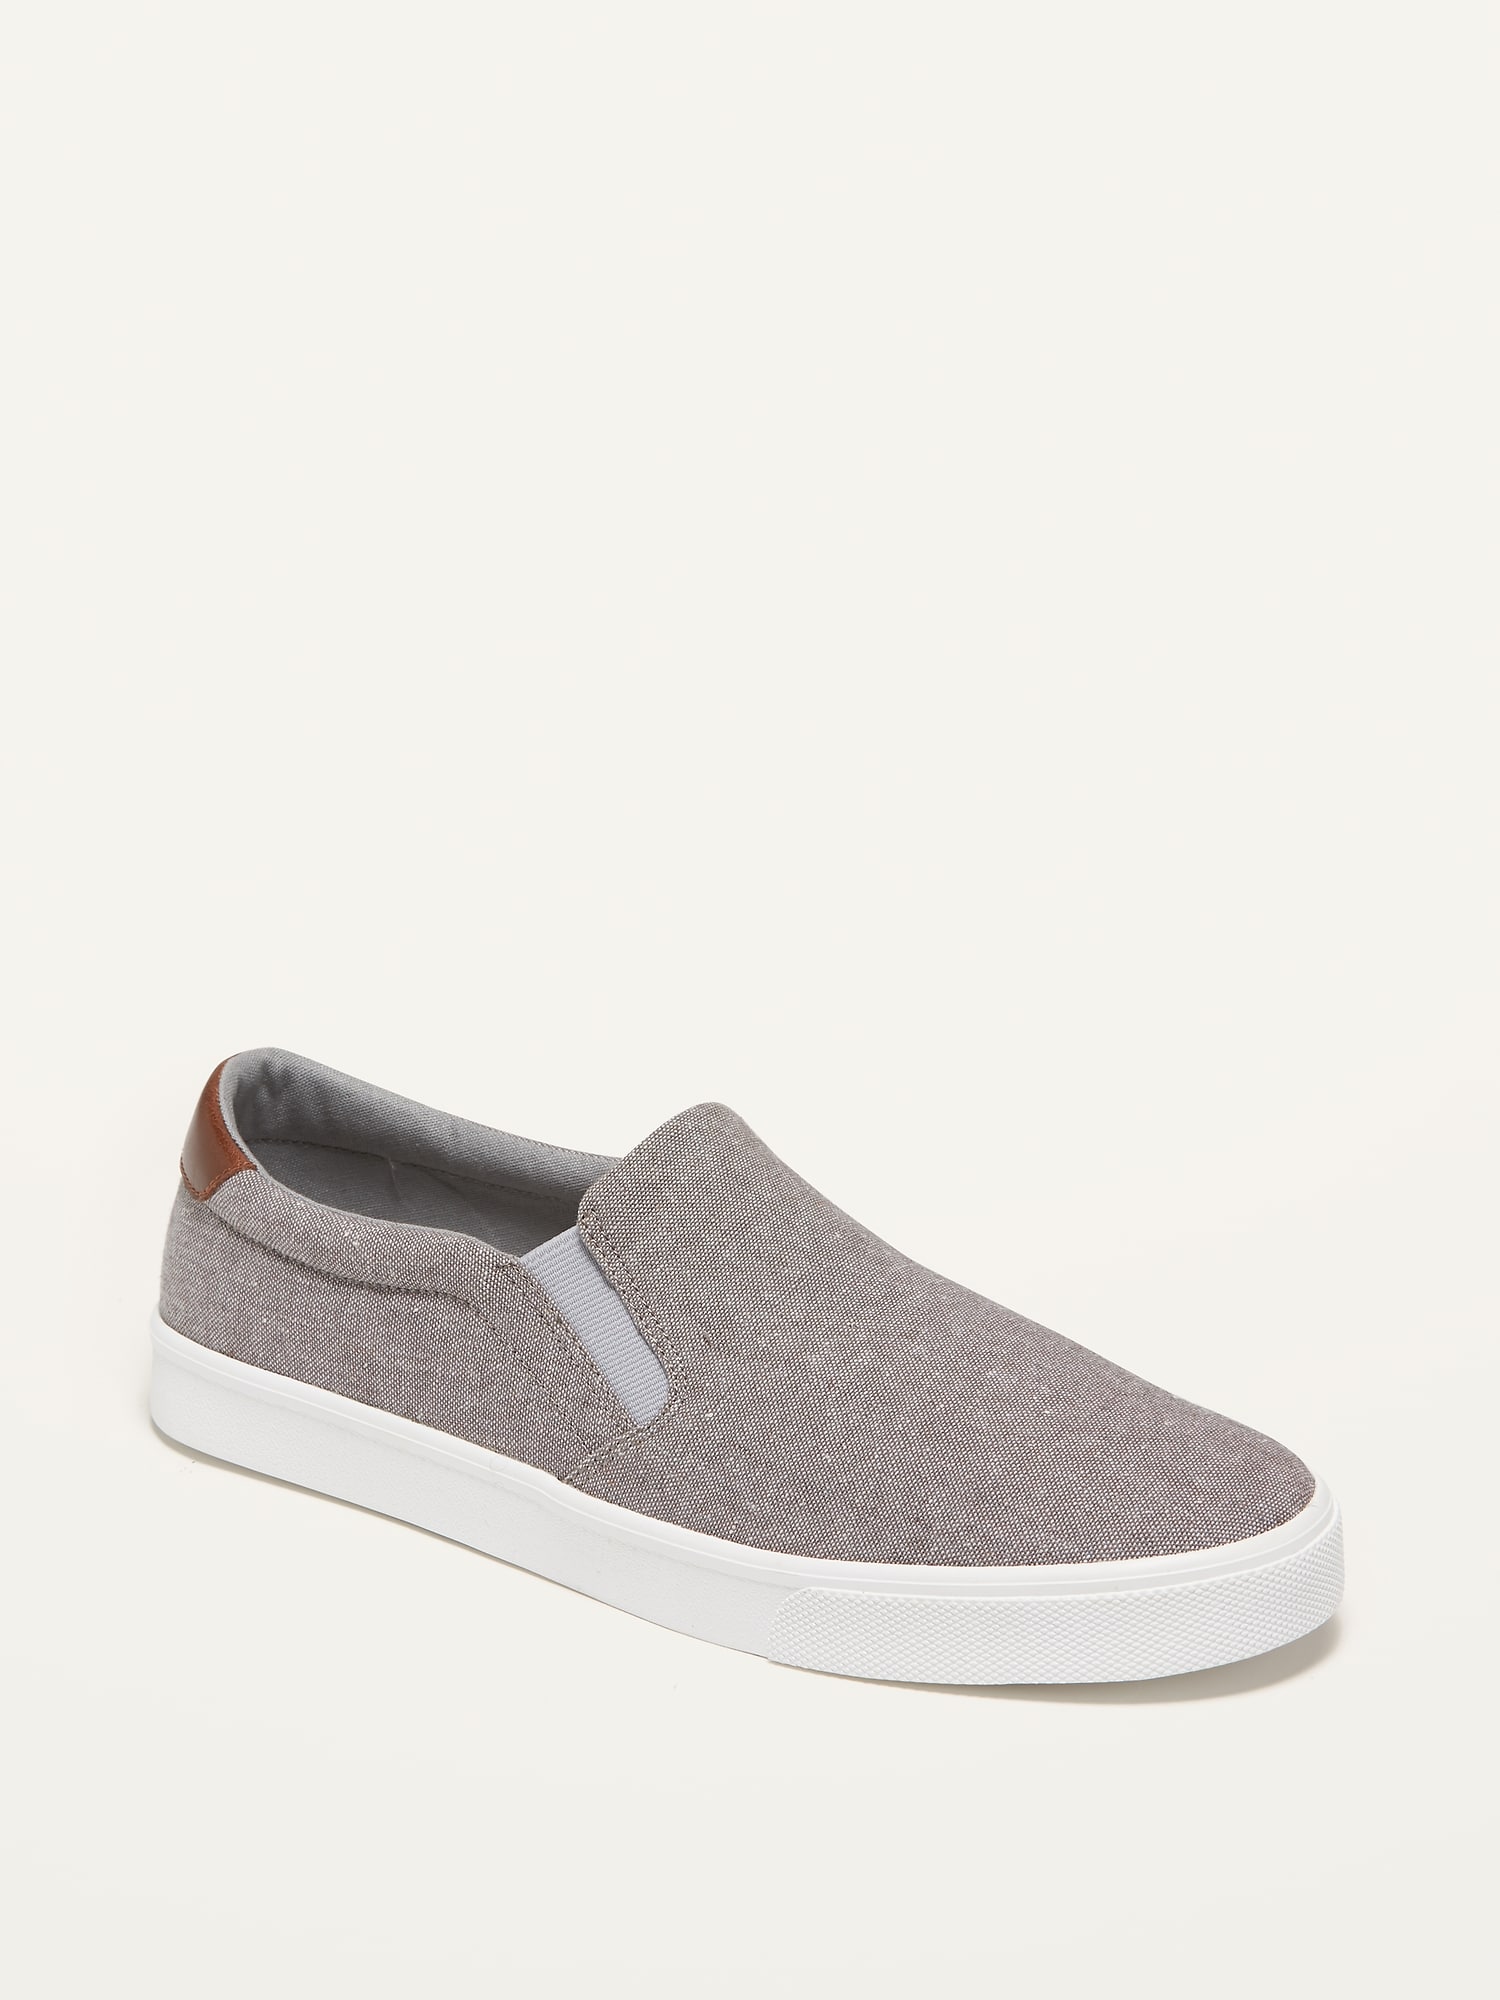 Mixed-Fabric Slip-Ons For Men | Old Navy